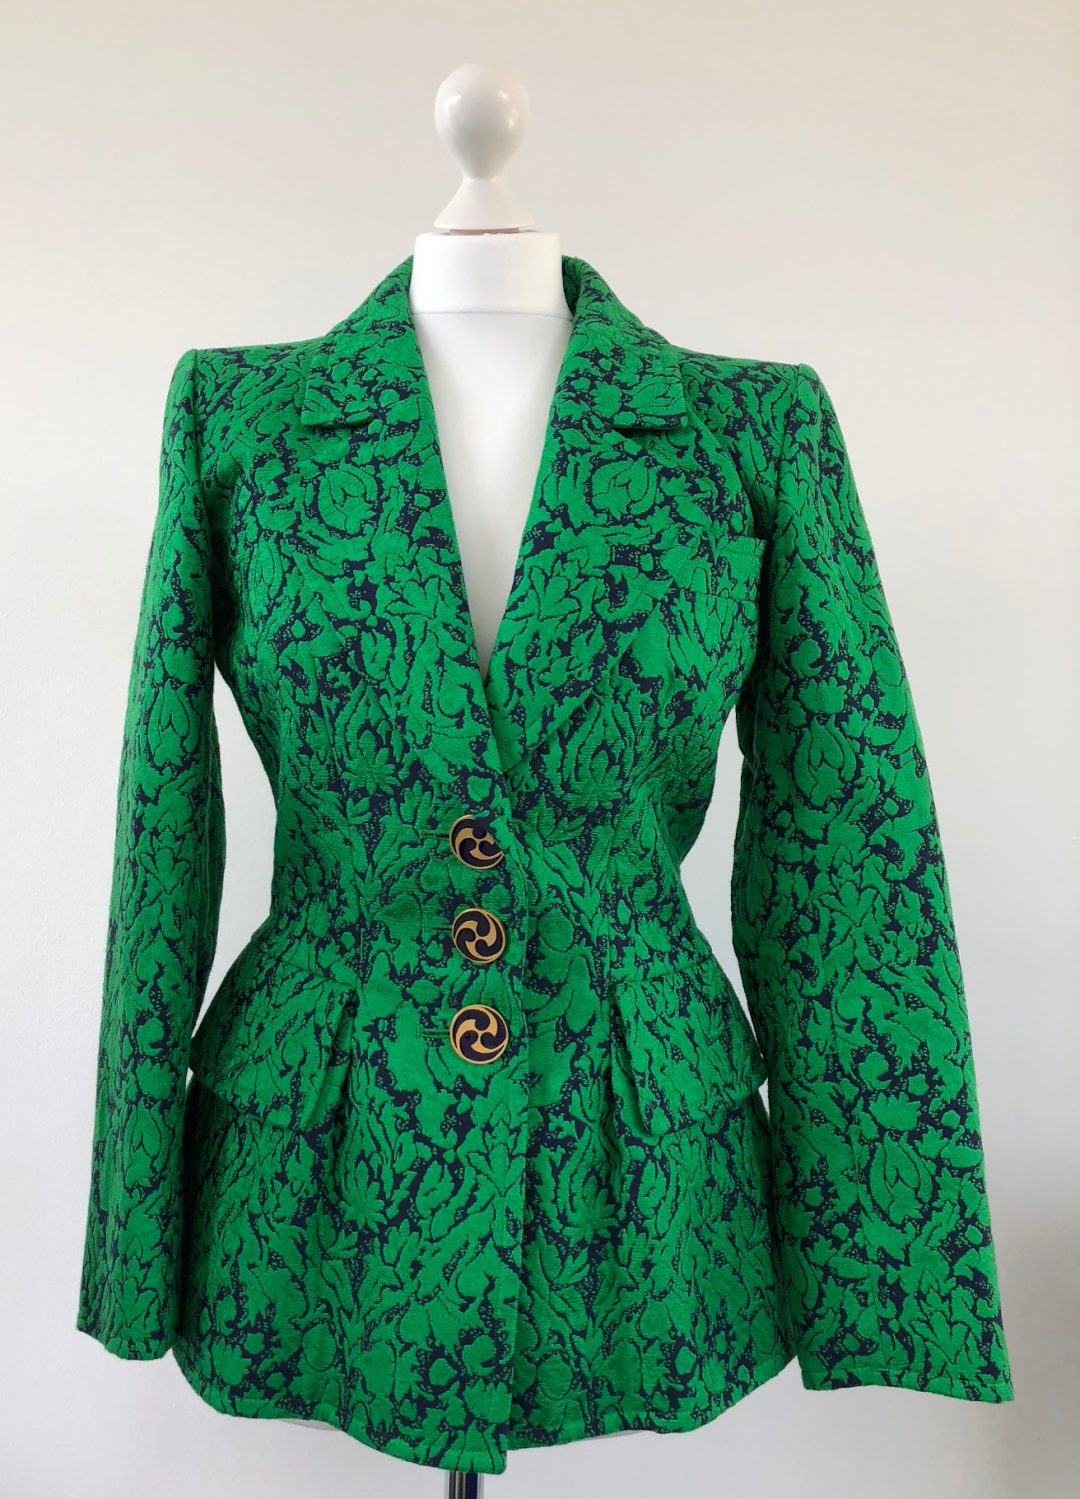 YSL Brocade Cashmere Print Fitted Jacket 1992-1993 Collection